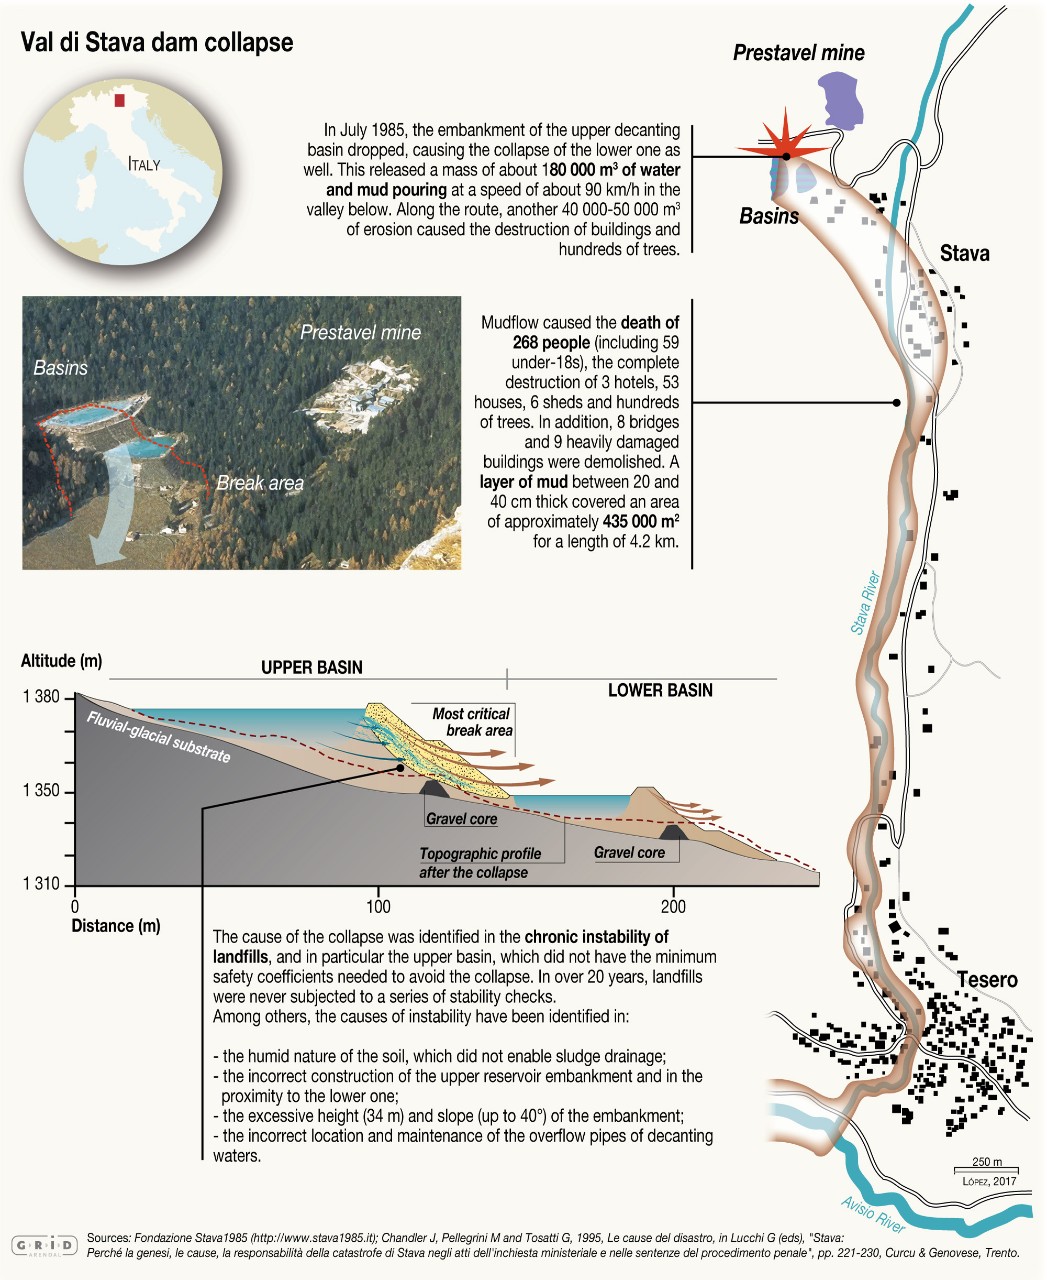 The database includes thousands of interactive maps and images, such as this explainer of the 1985 Val di Stava, Italy, dam collapse.